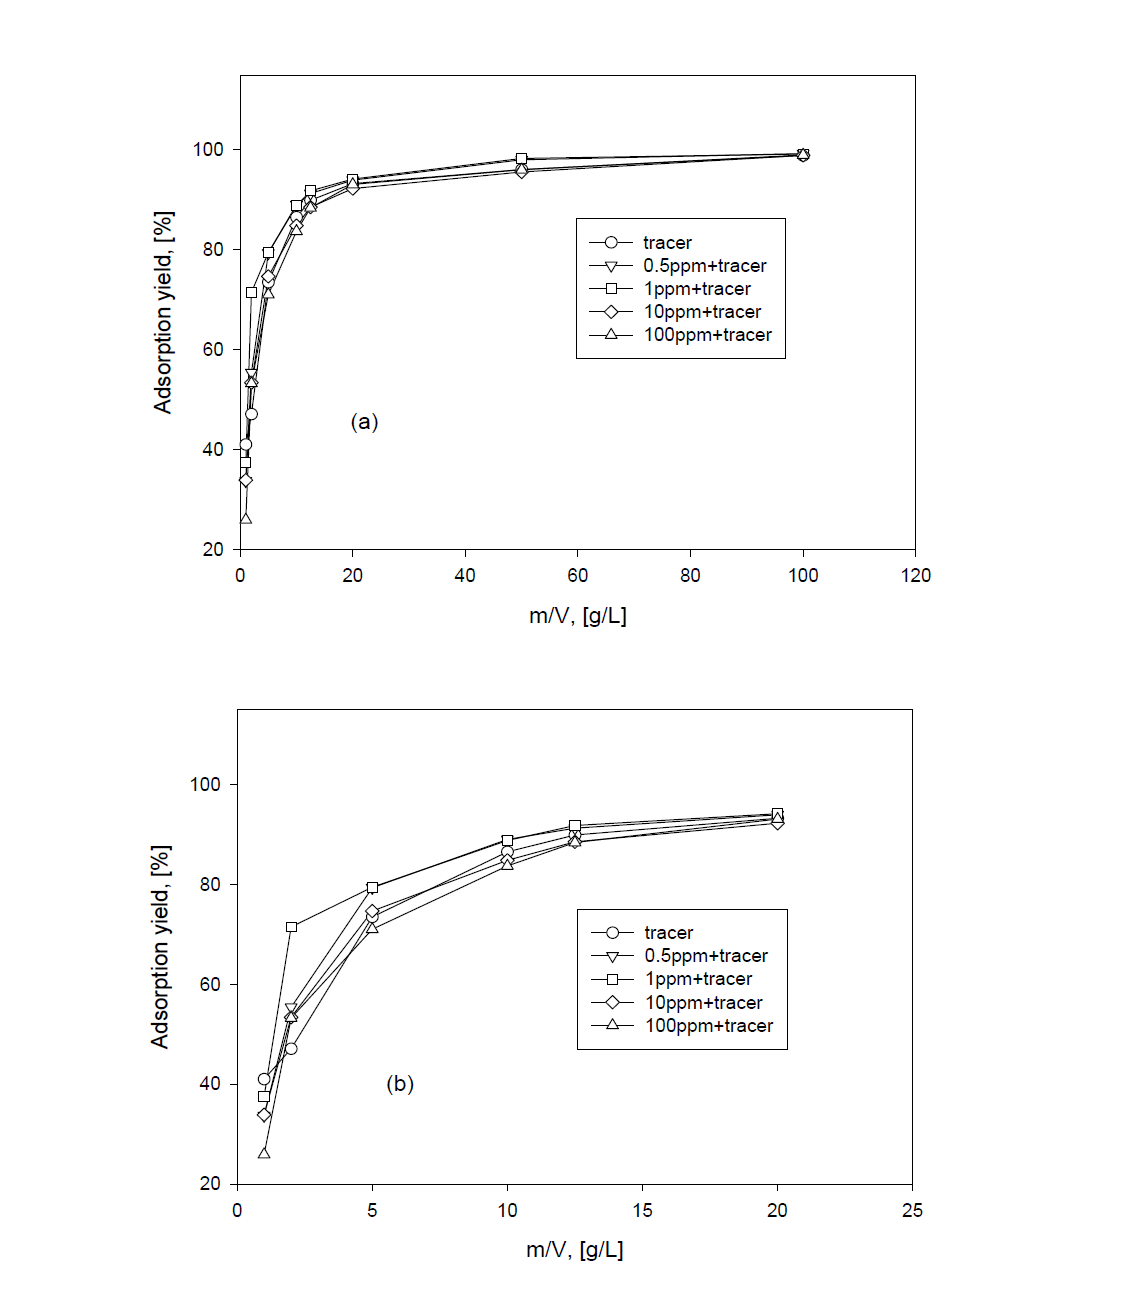 Adsorption yield of Cs by IE96 zeolite with ratio of m/V.